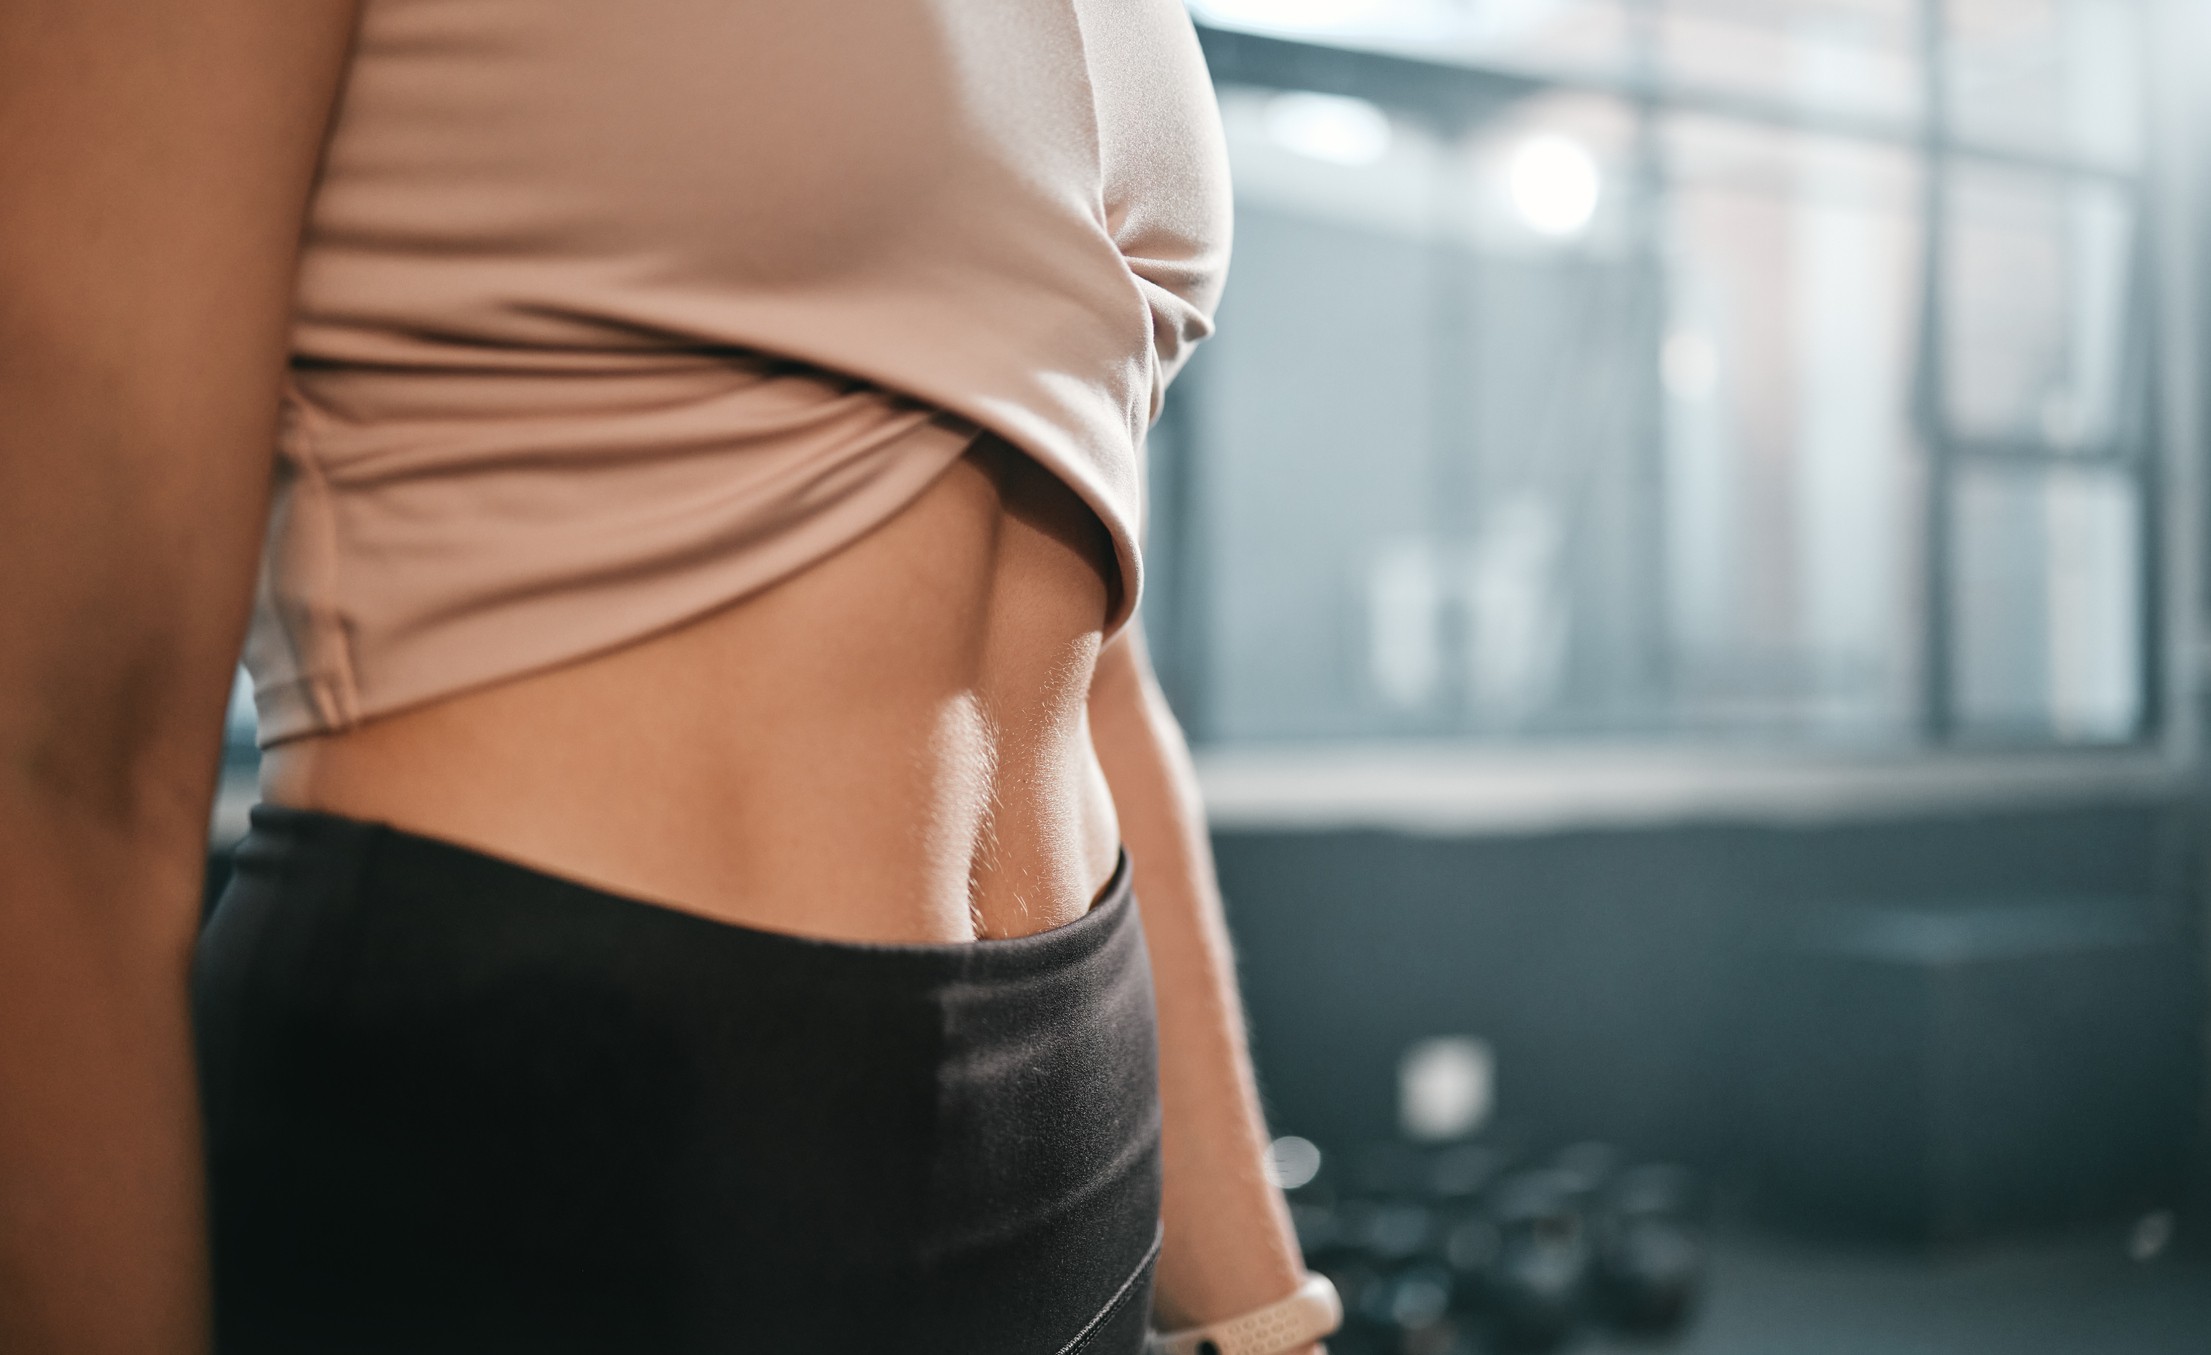 Fitness, stomach and woman in a gym for exercise, health or wellness for weightloss training. Sports, tummy tuck and closeup of a slim female athlete or model belly after a workout in a sport center.